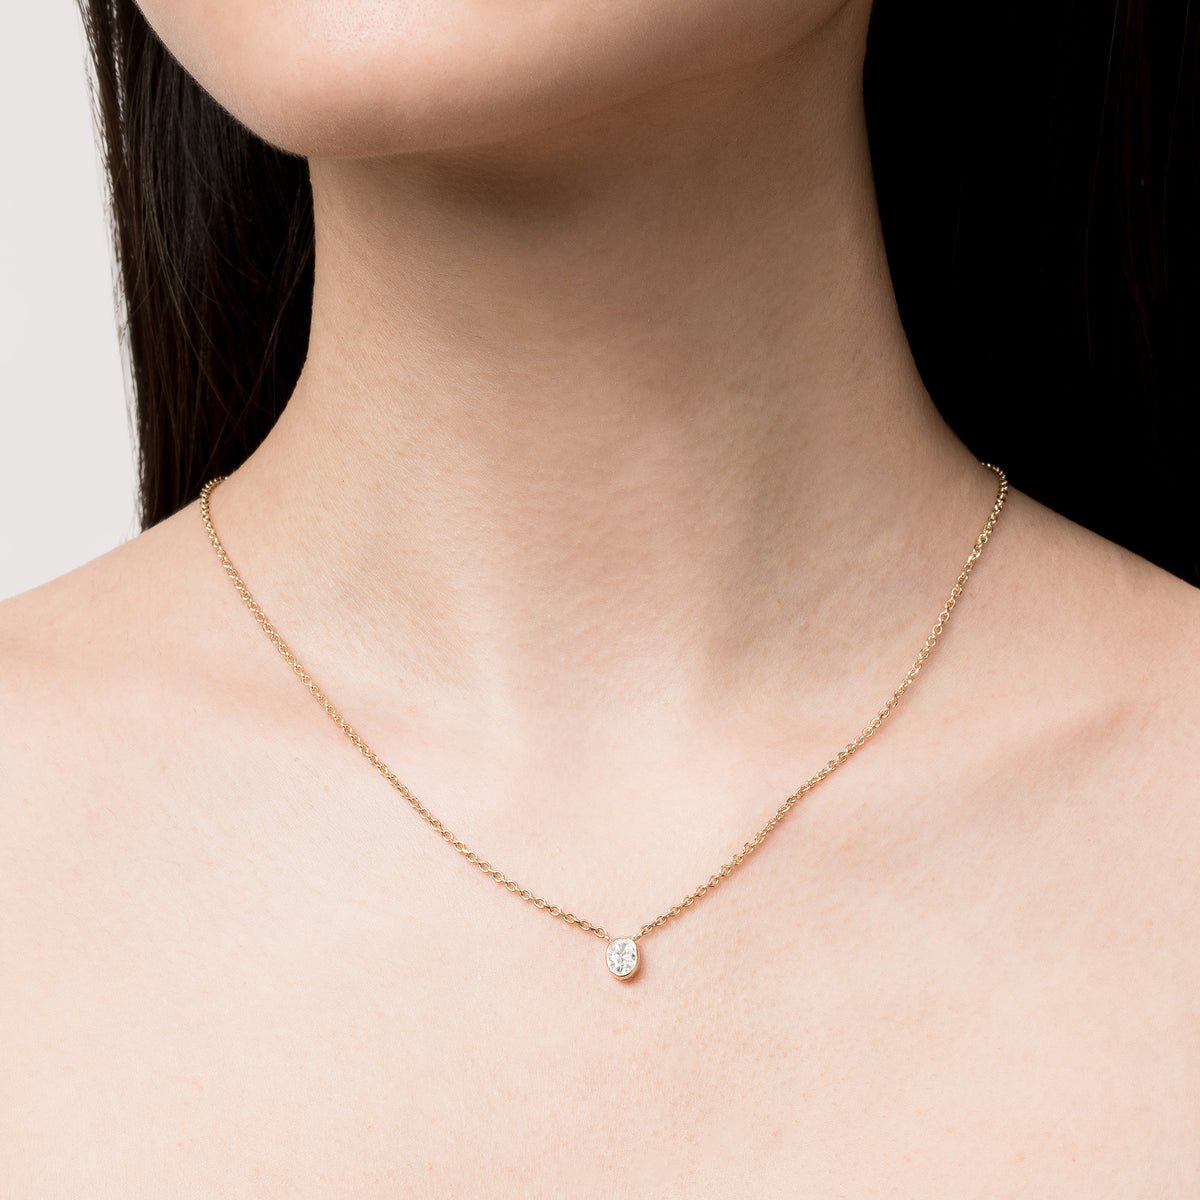 Tewiky Diamond Necklaces for Women, Dainty Gold India | Ubuy